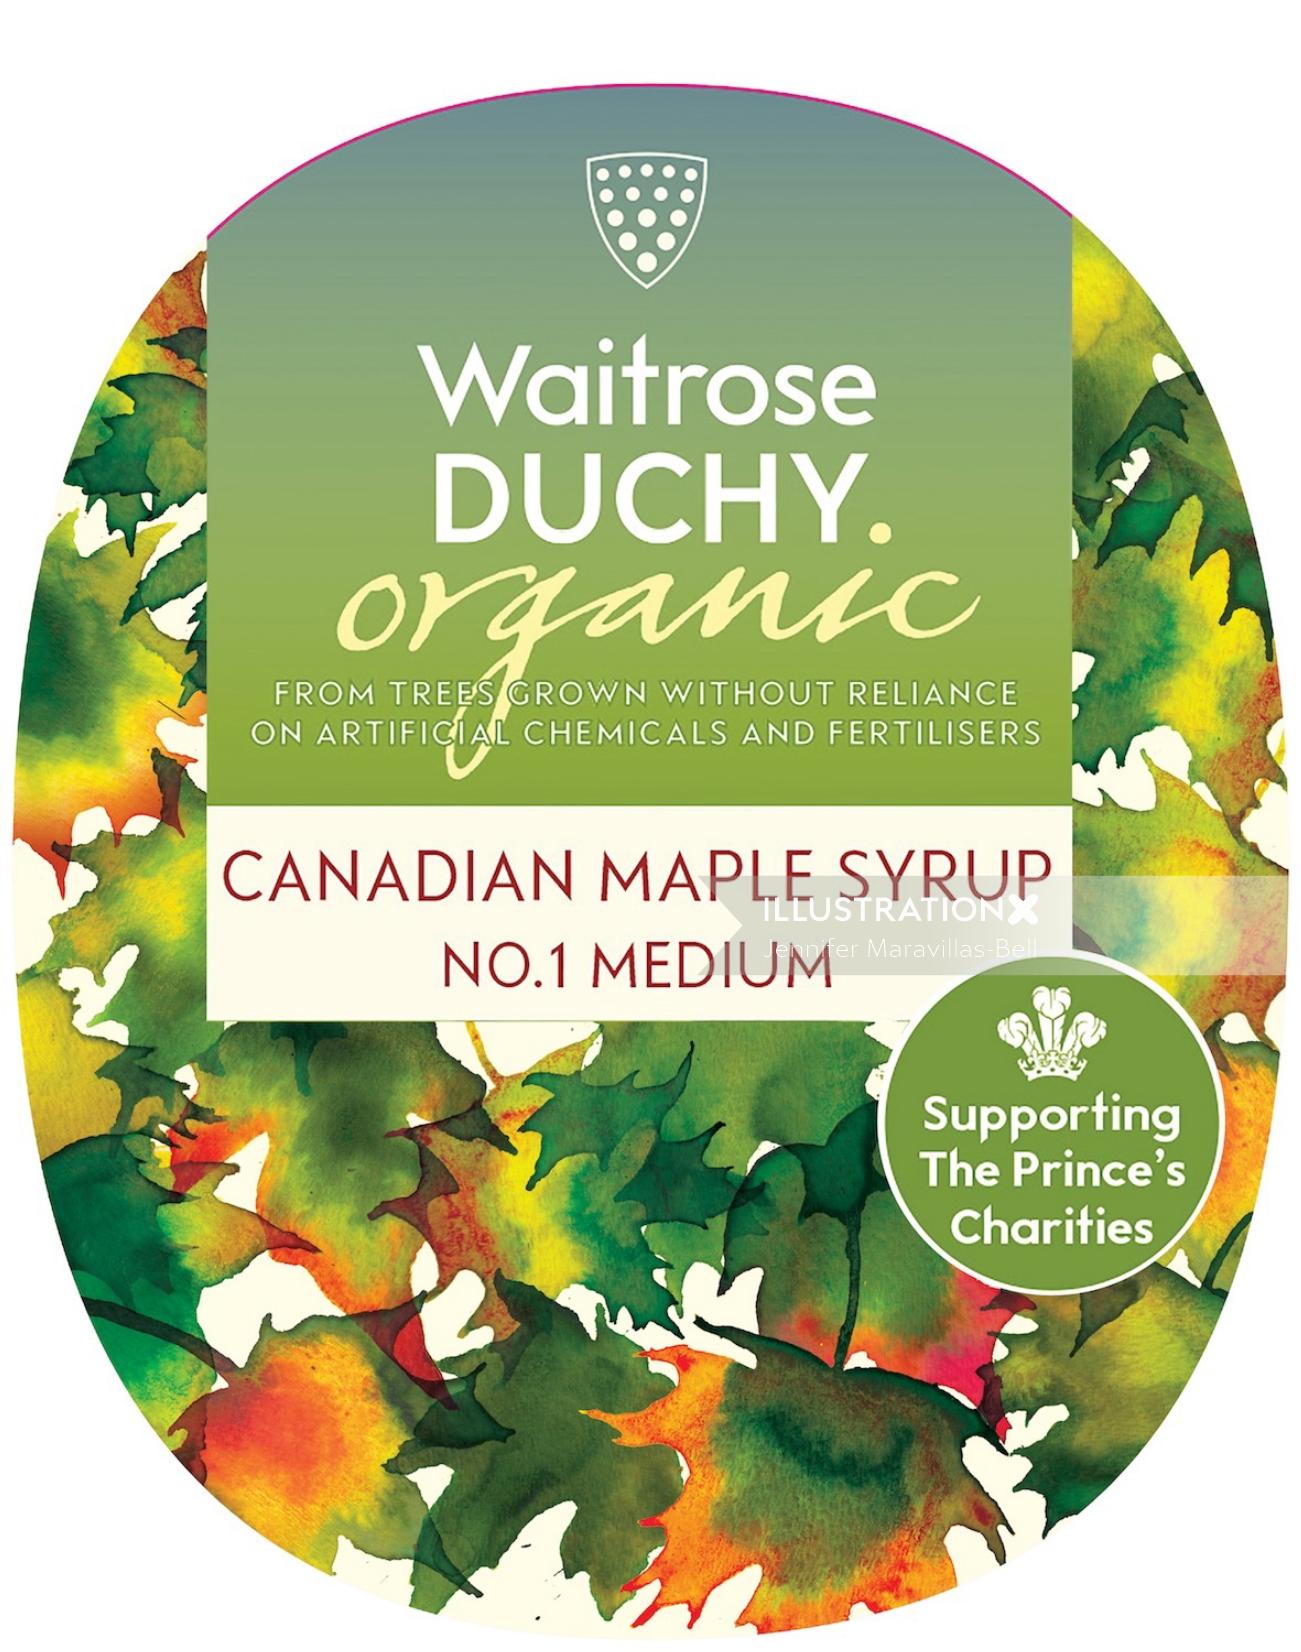 Label design for Waitrose Duchy organic - Canadian Maple Syrup